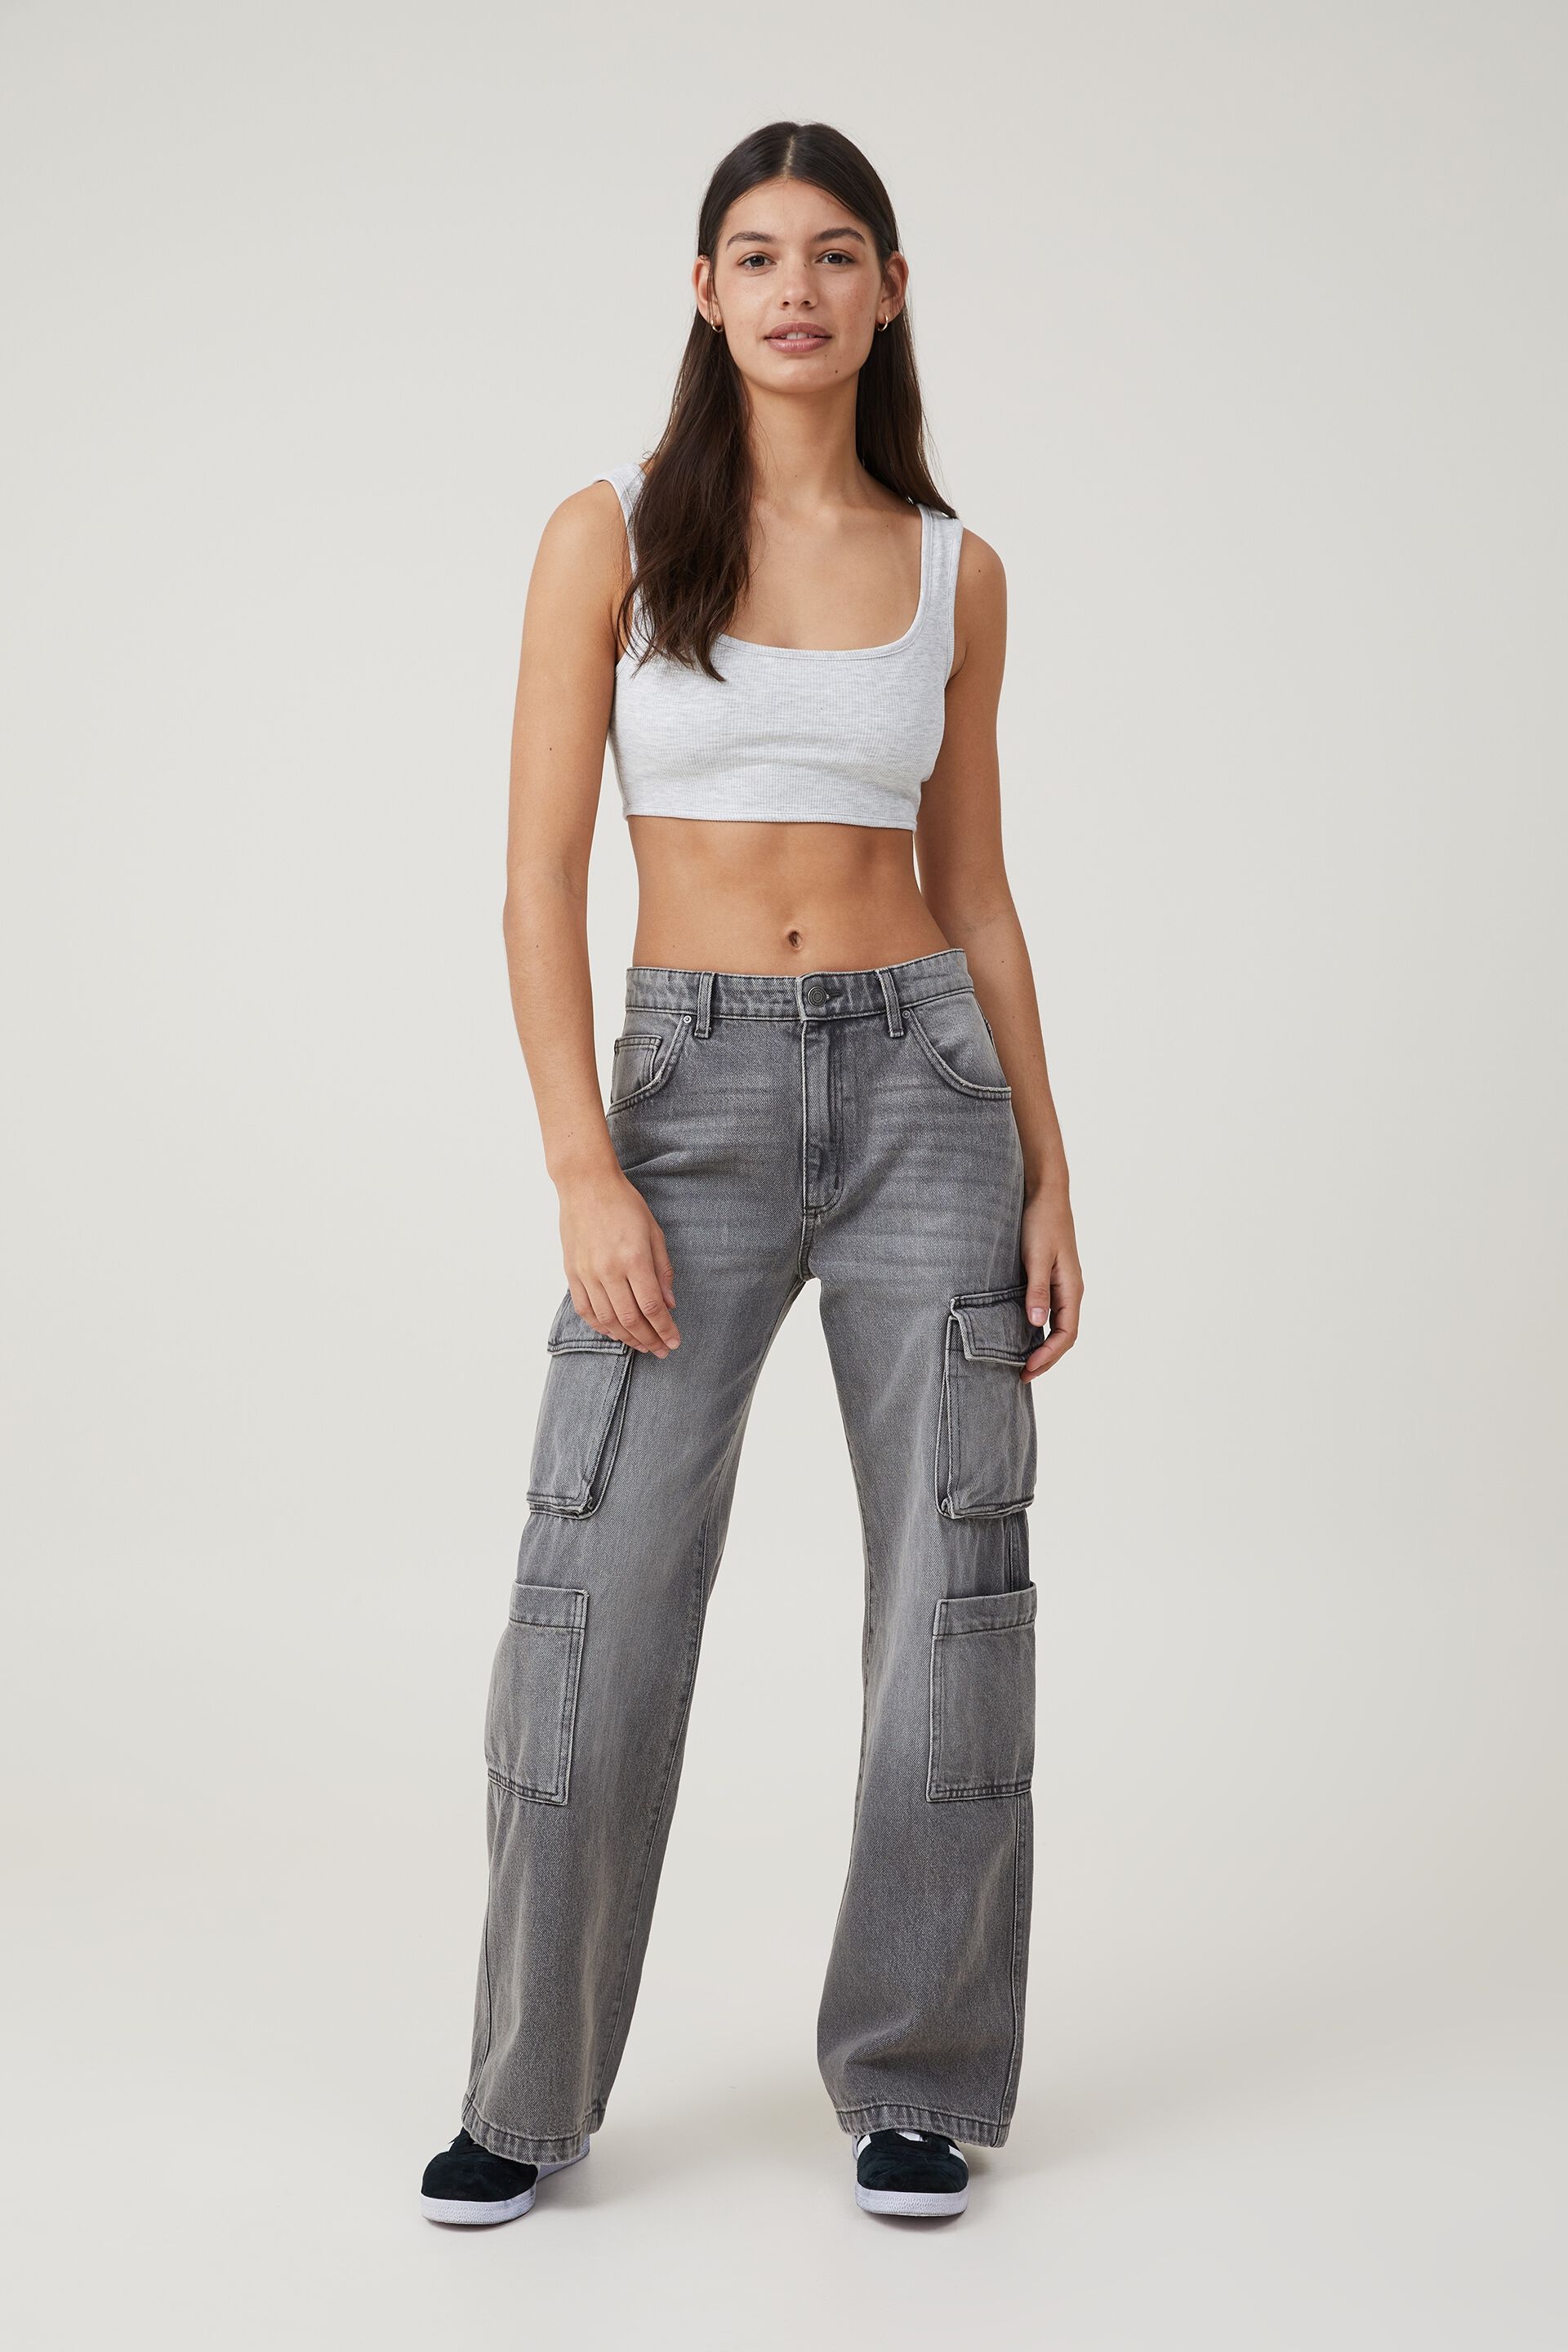 Update more than 166 cotton on denim pants